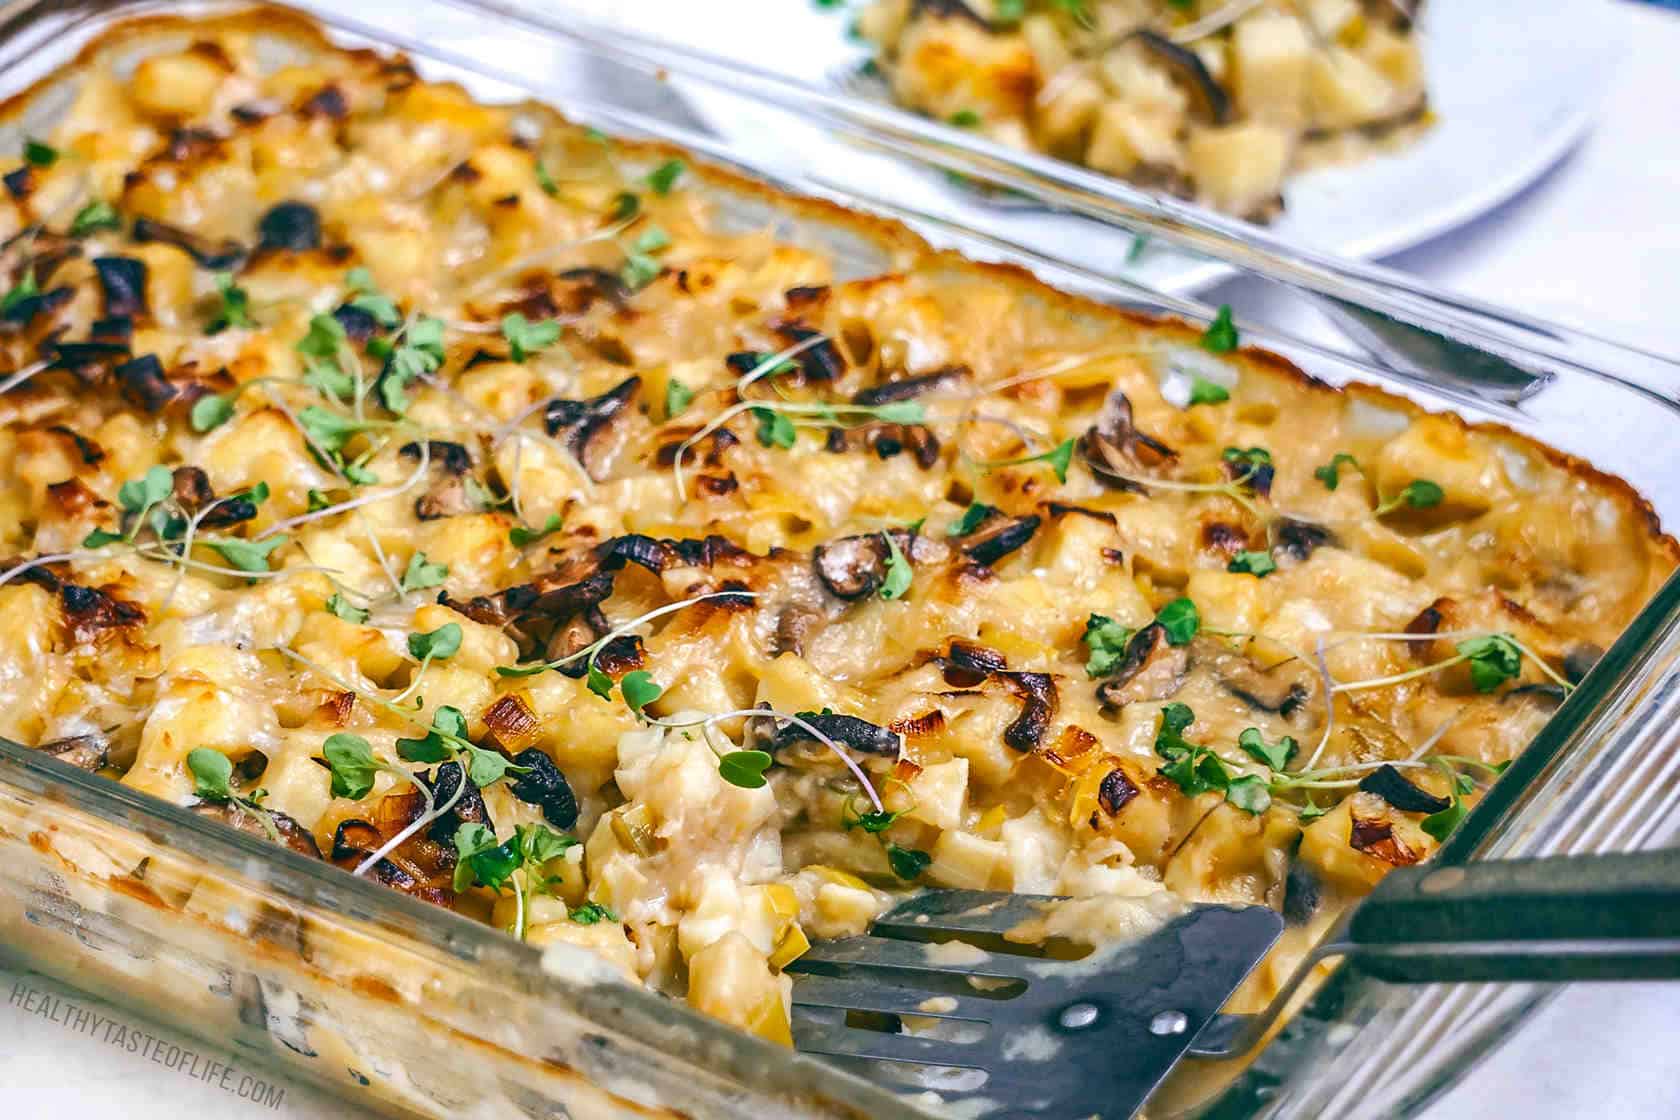 Vegan potato bake or casserole baked in the oven with a creamy vegan sauce, mushrooms and vegan feta cheese.